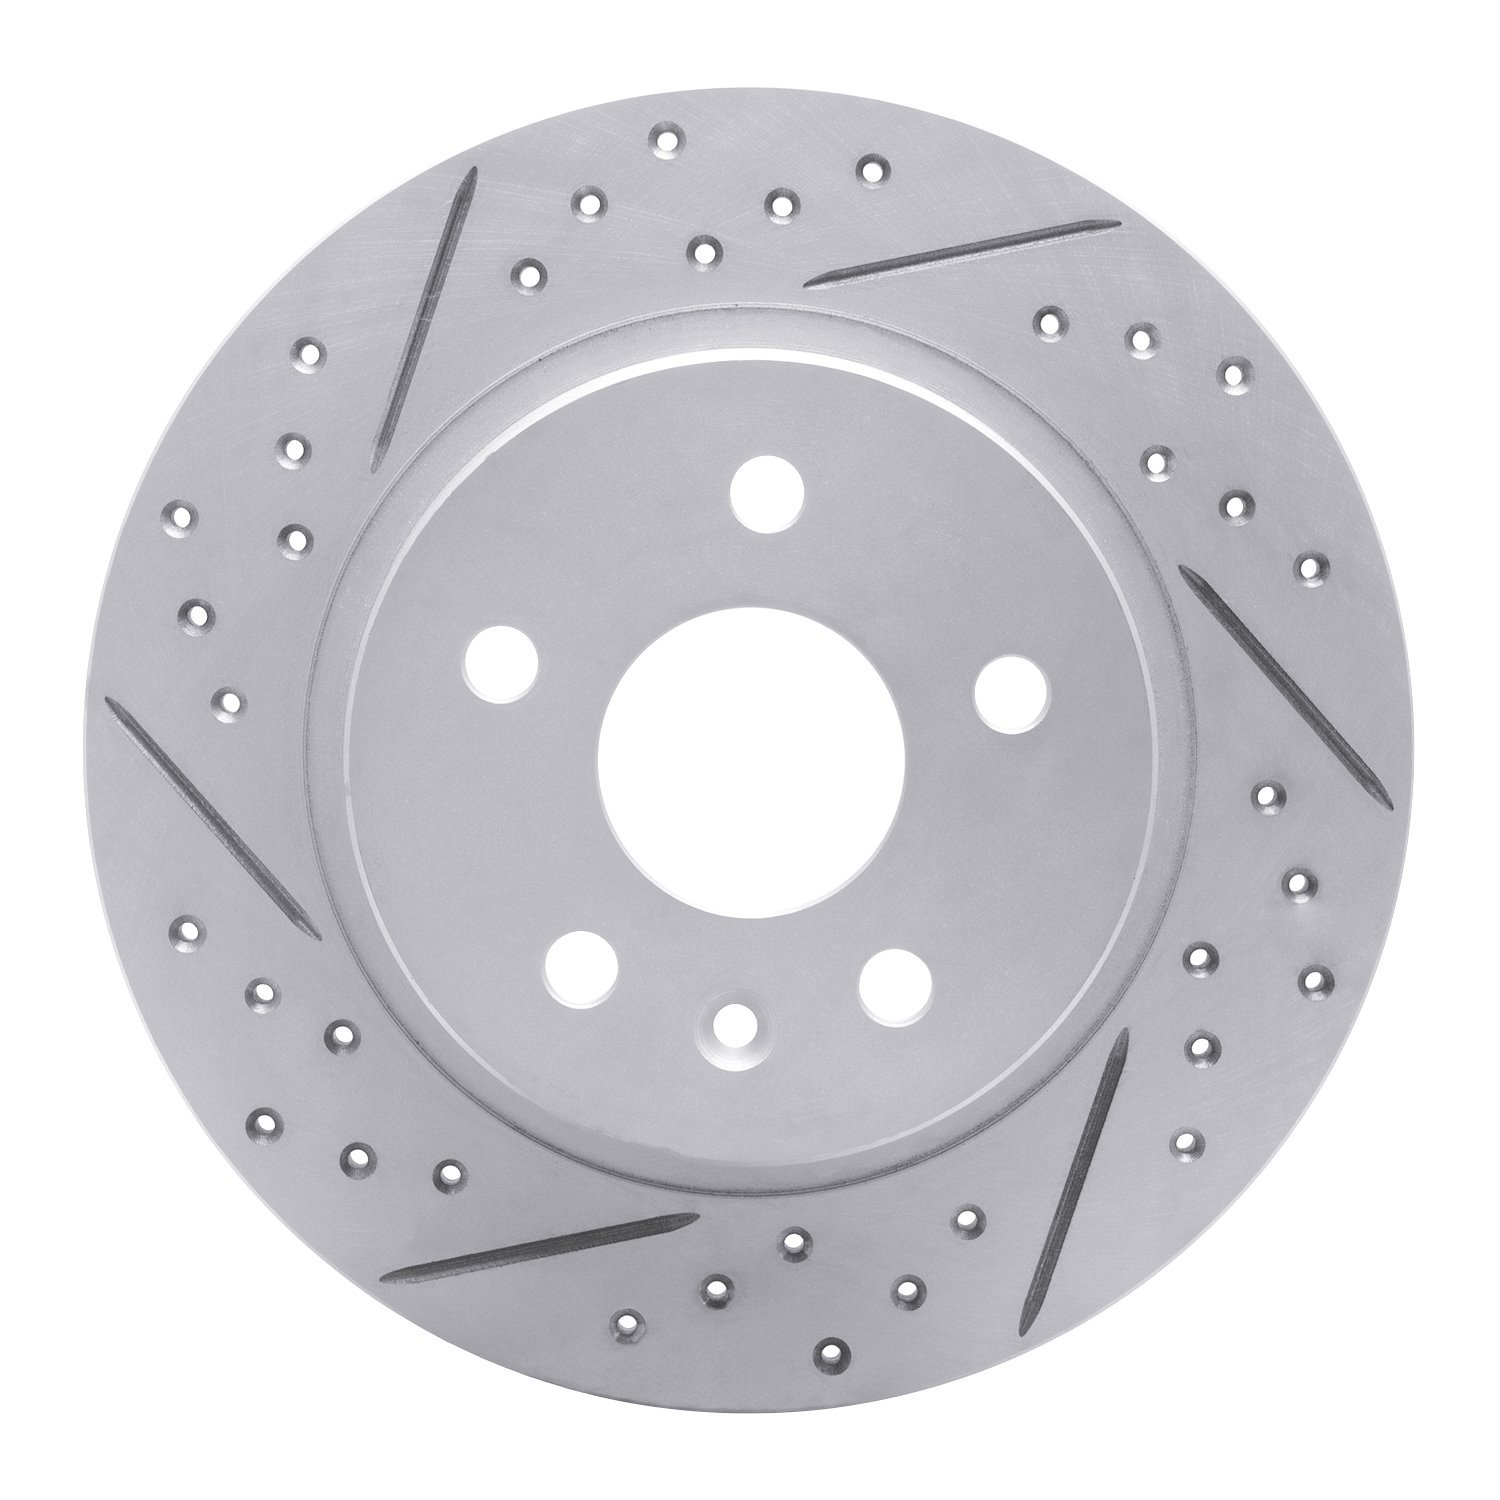 830-45018L Geoperformance Drilled/Slotted Brake Rotor, Fits Select GM, Position: Rear Left